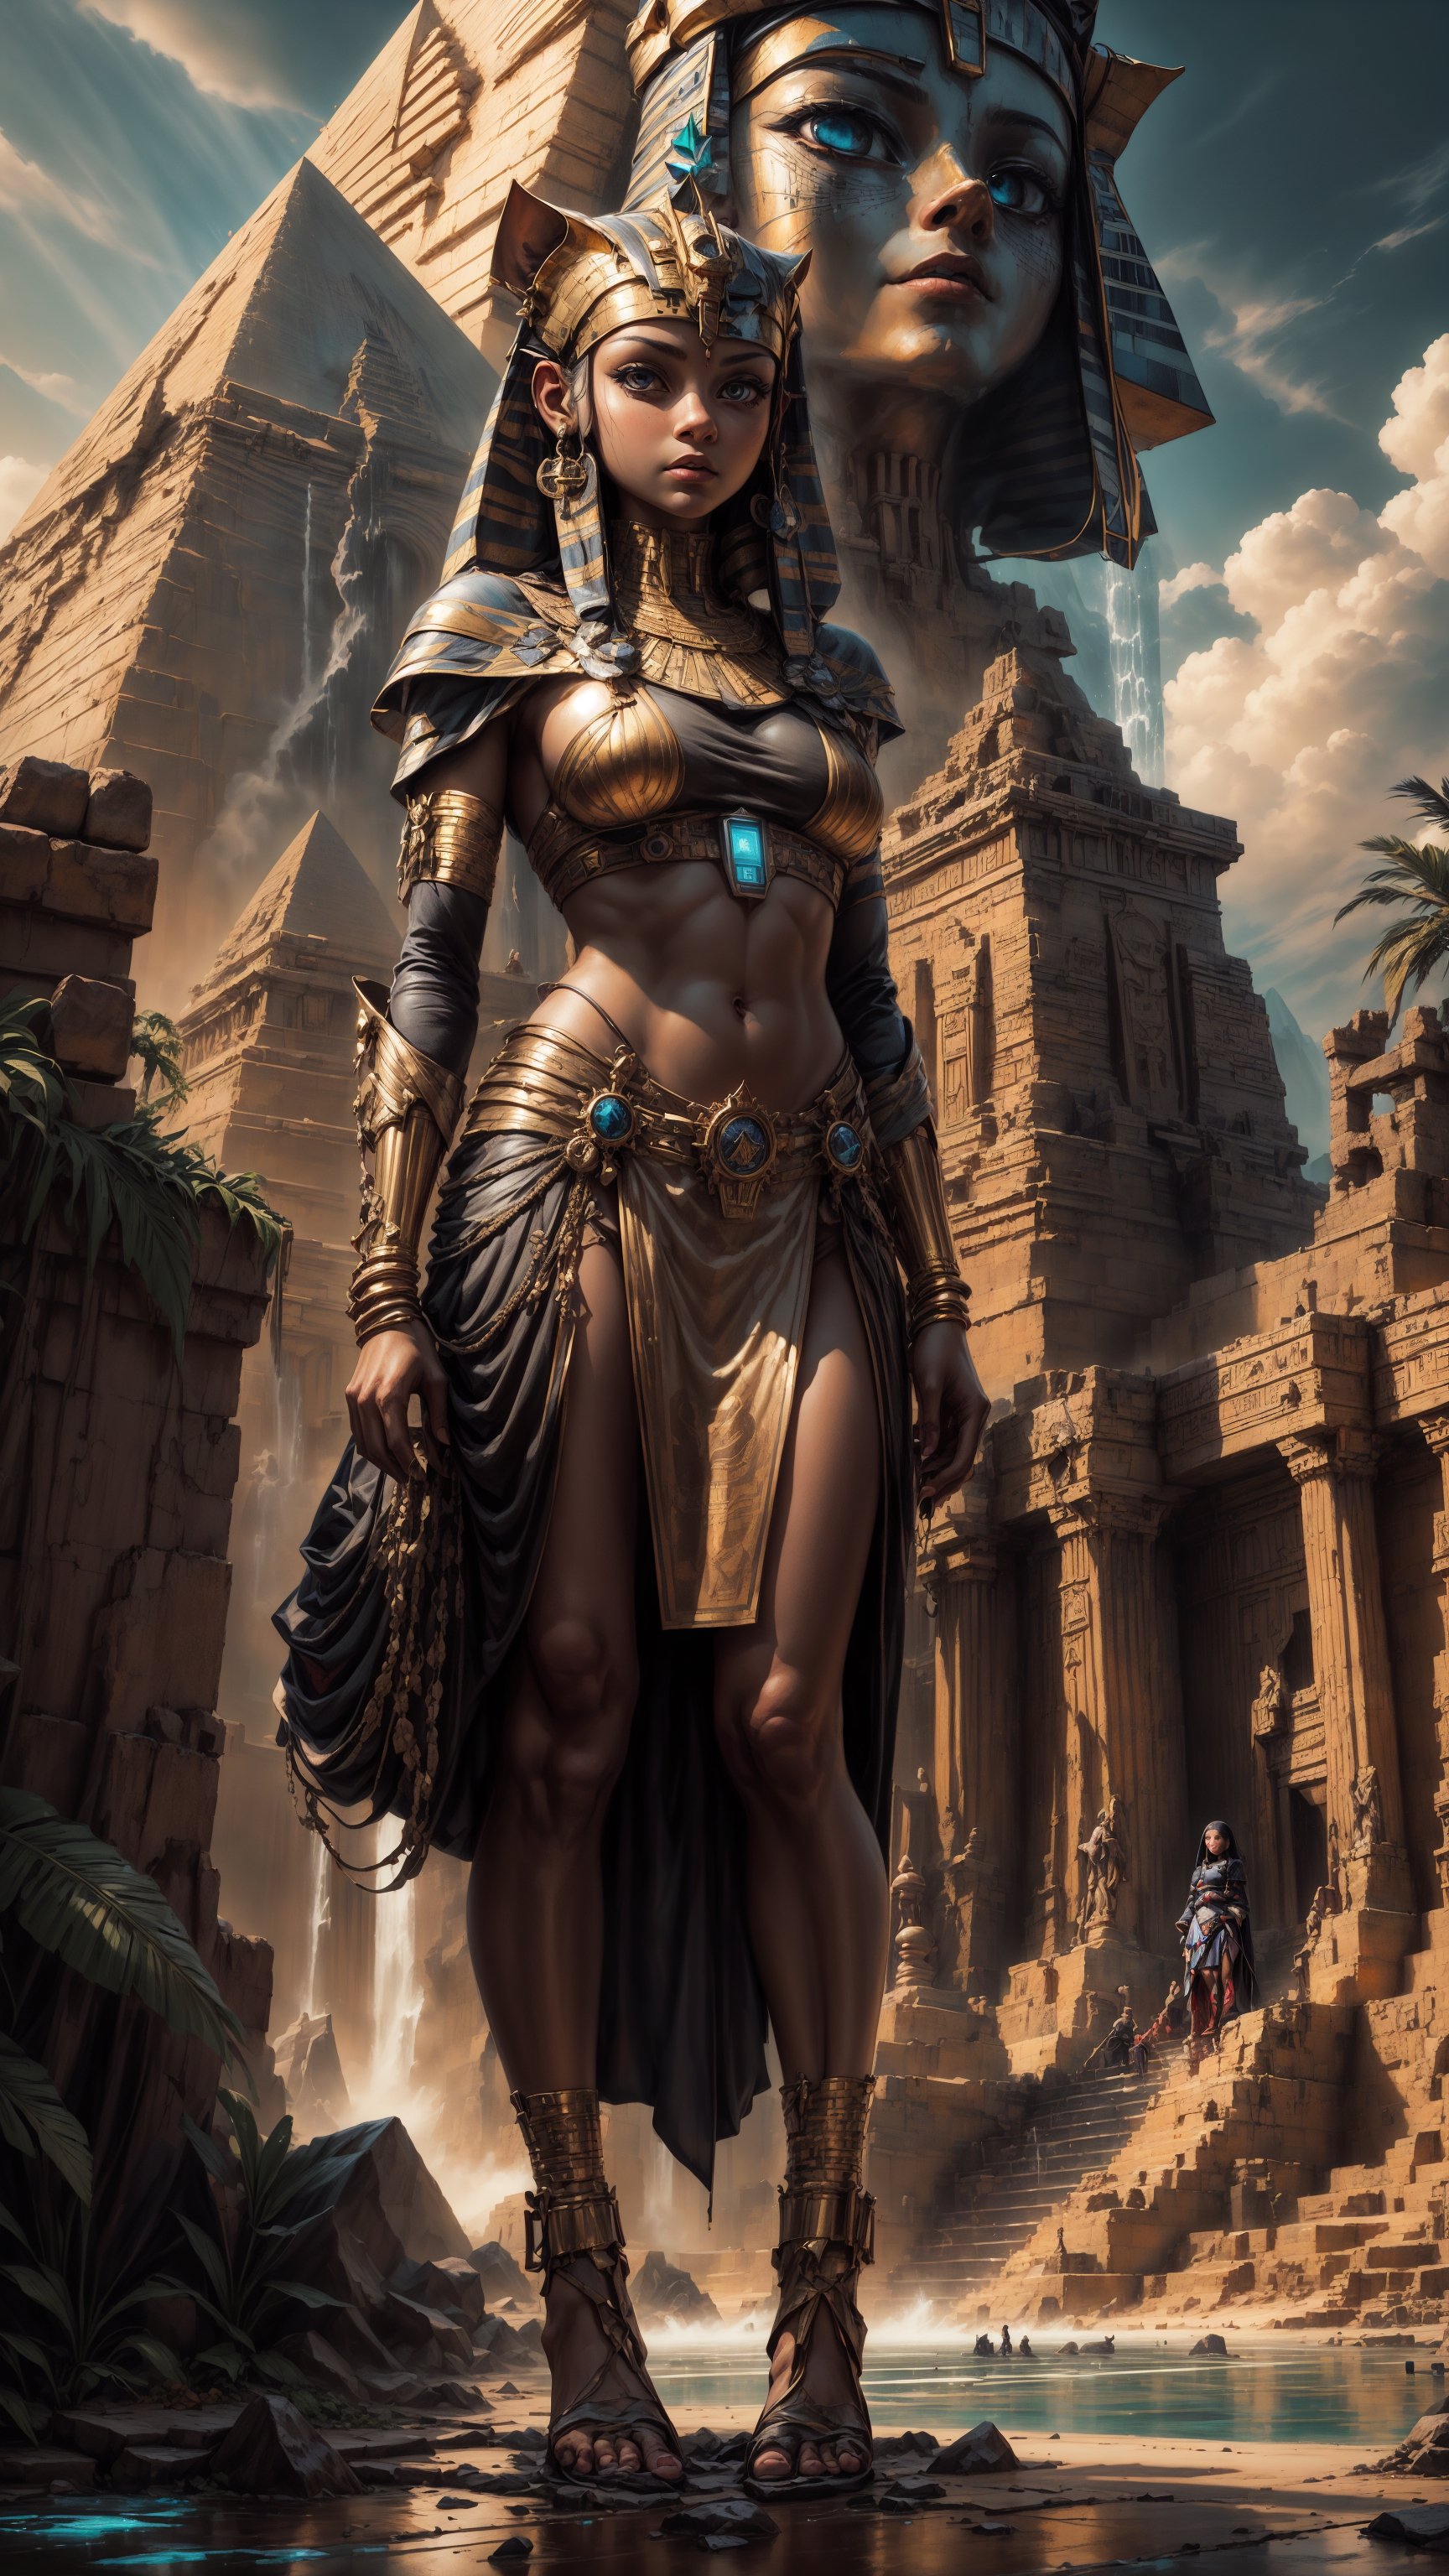 "photorealistic, high resolution, ((girl with curious expression)), standing in front of a grand sphinx, floating islands with waterfalls, pyramids in the distance, golden hour lighting, dramatic clouds, rule of thirds, ((sharp focus)), ((rich colors))"

,nodf_lora,Cyber_Egypt